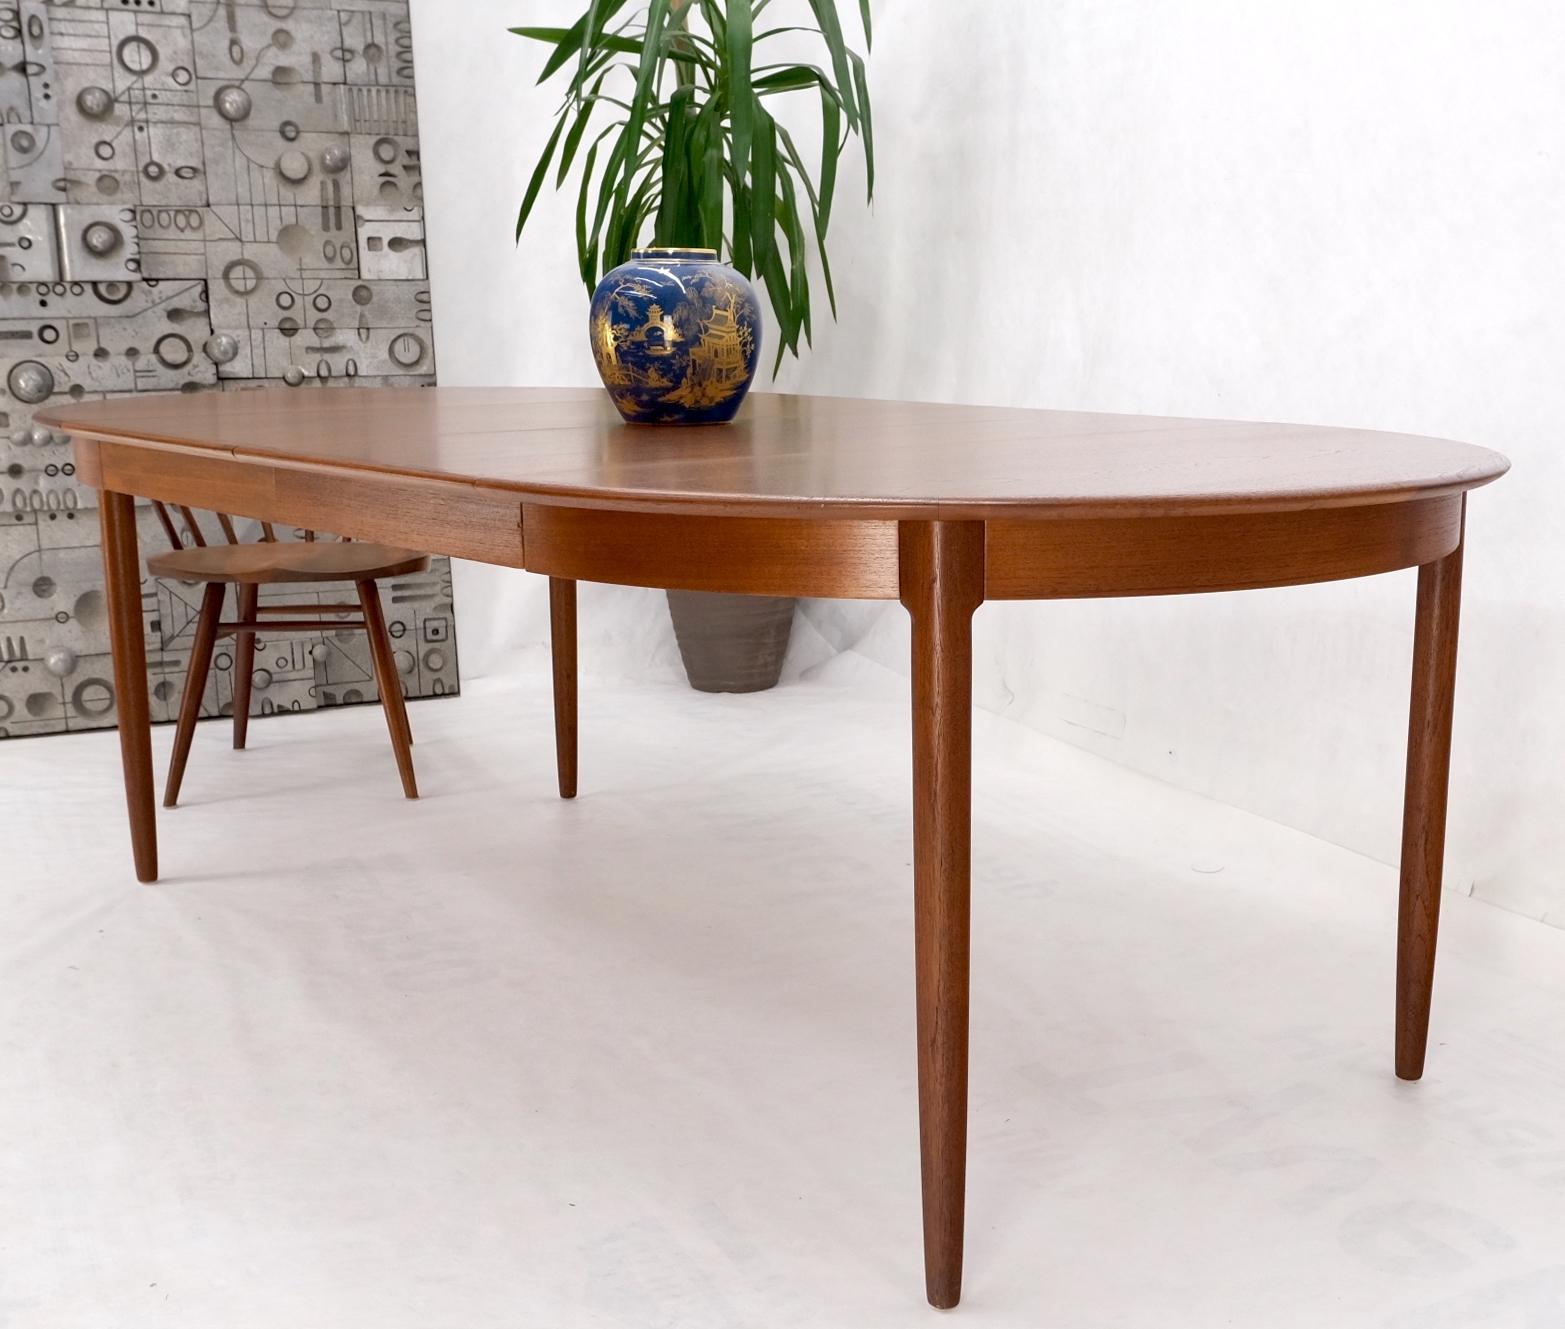 Danish Teak Mid-Century Modern Round Dining Table w/ Two Extension Boards Leafs For Sale 9